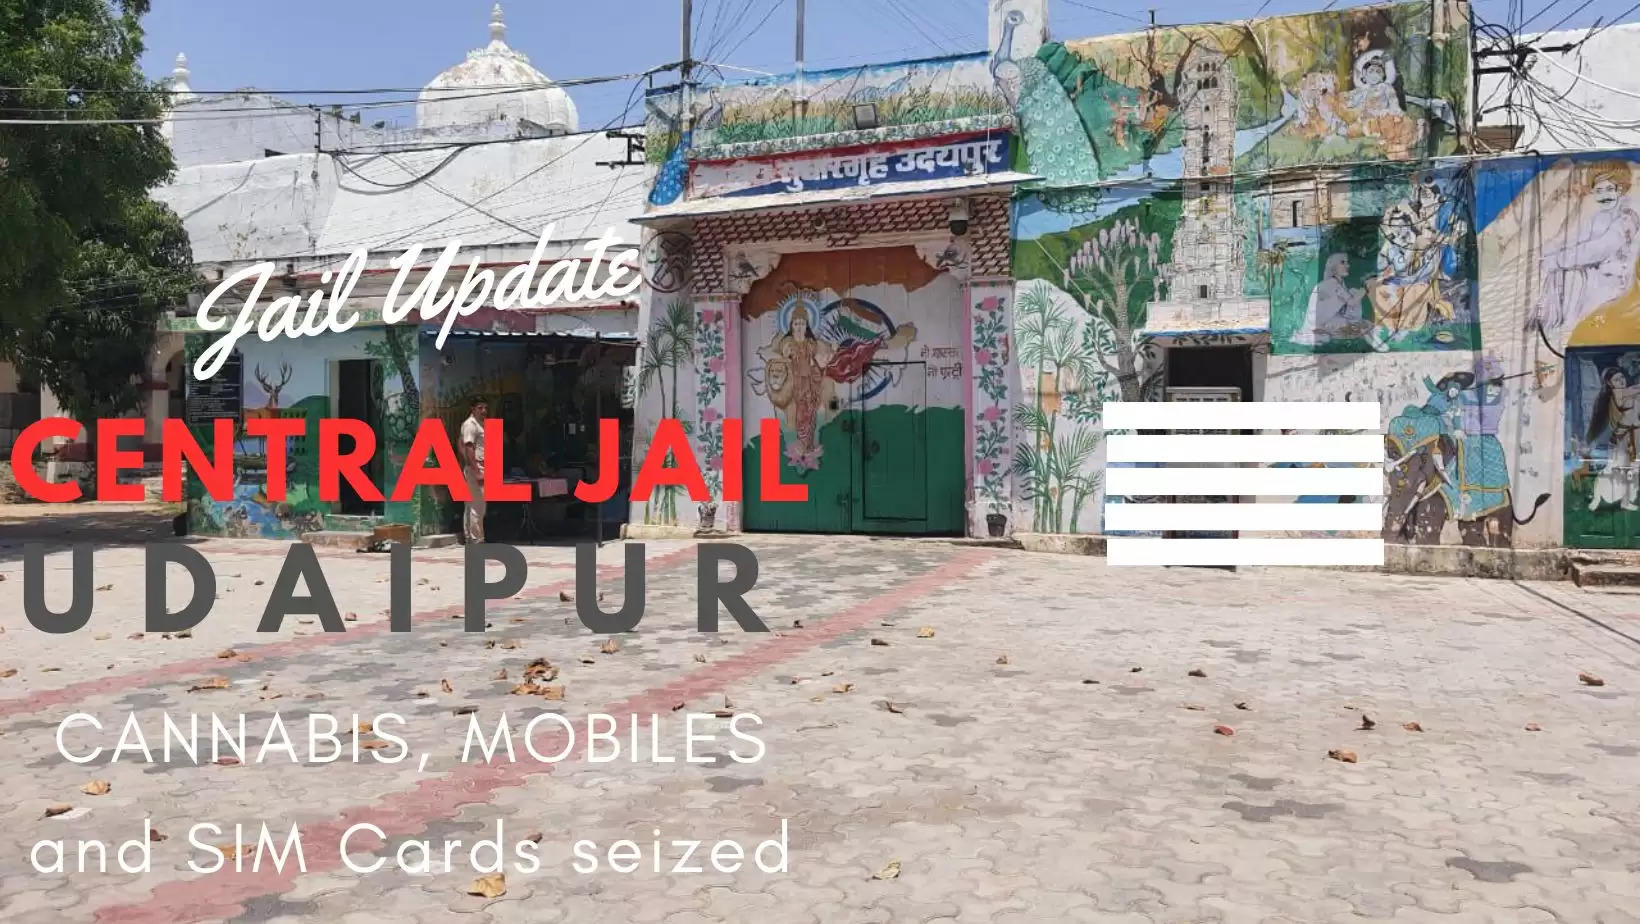 Udaipur Central Jail Cannabis Mobile Phone recovered from inmates in Udaipur Jail